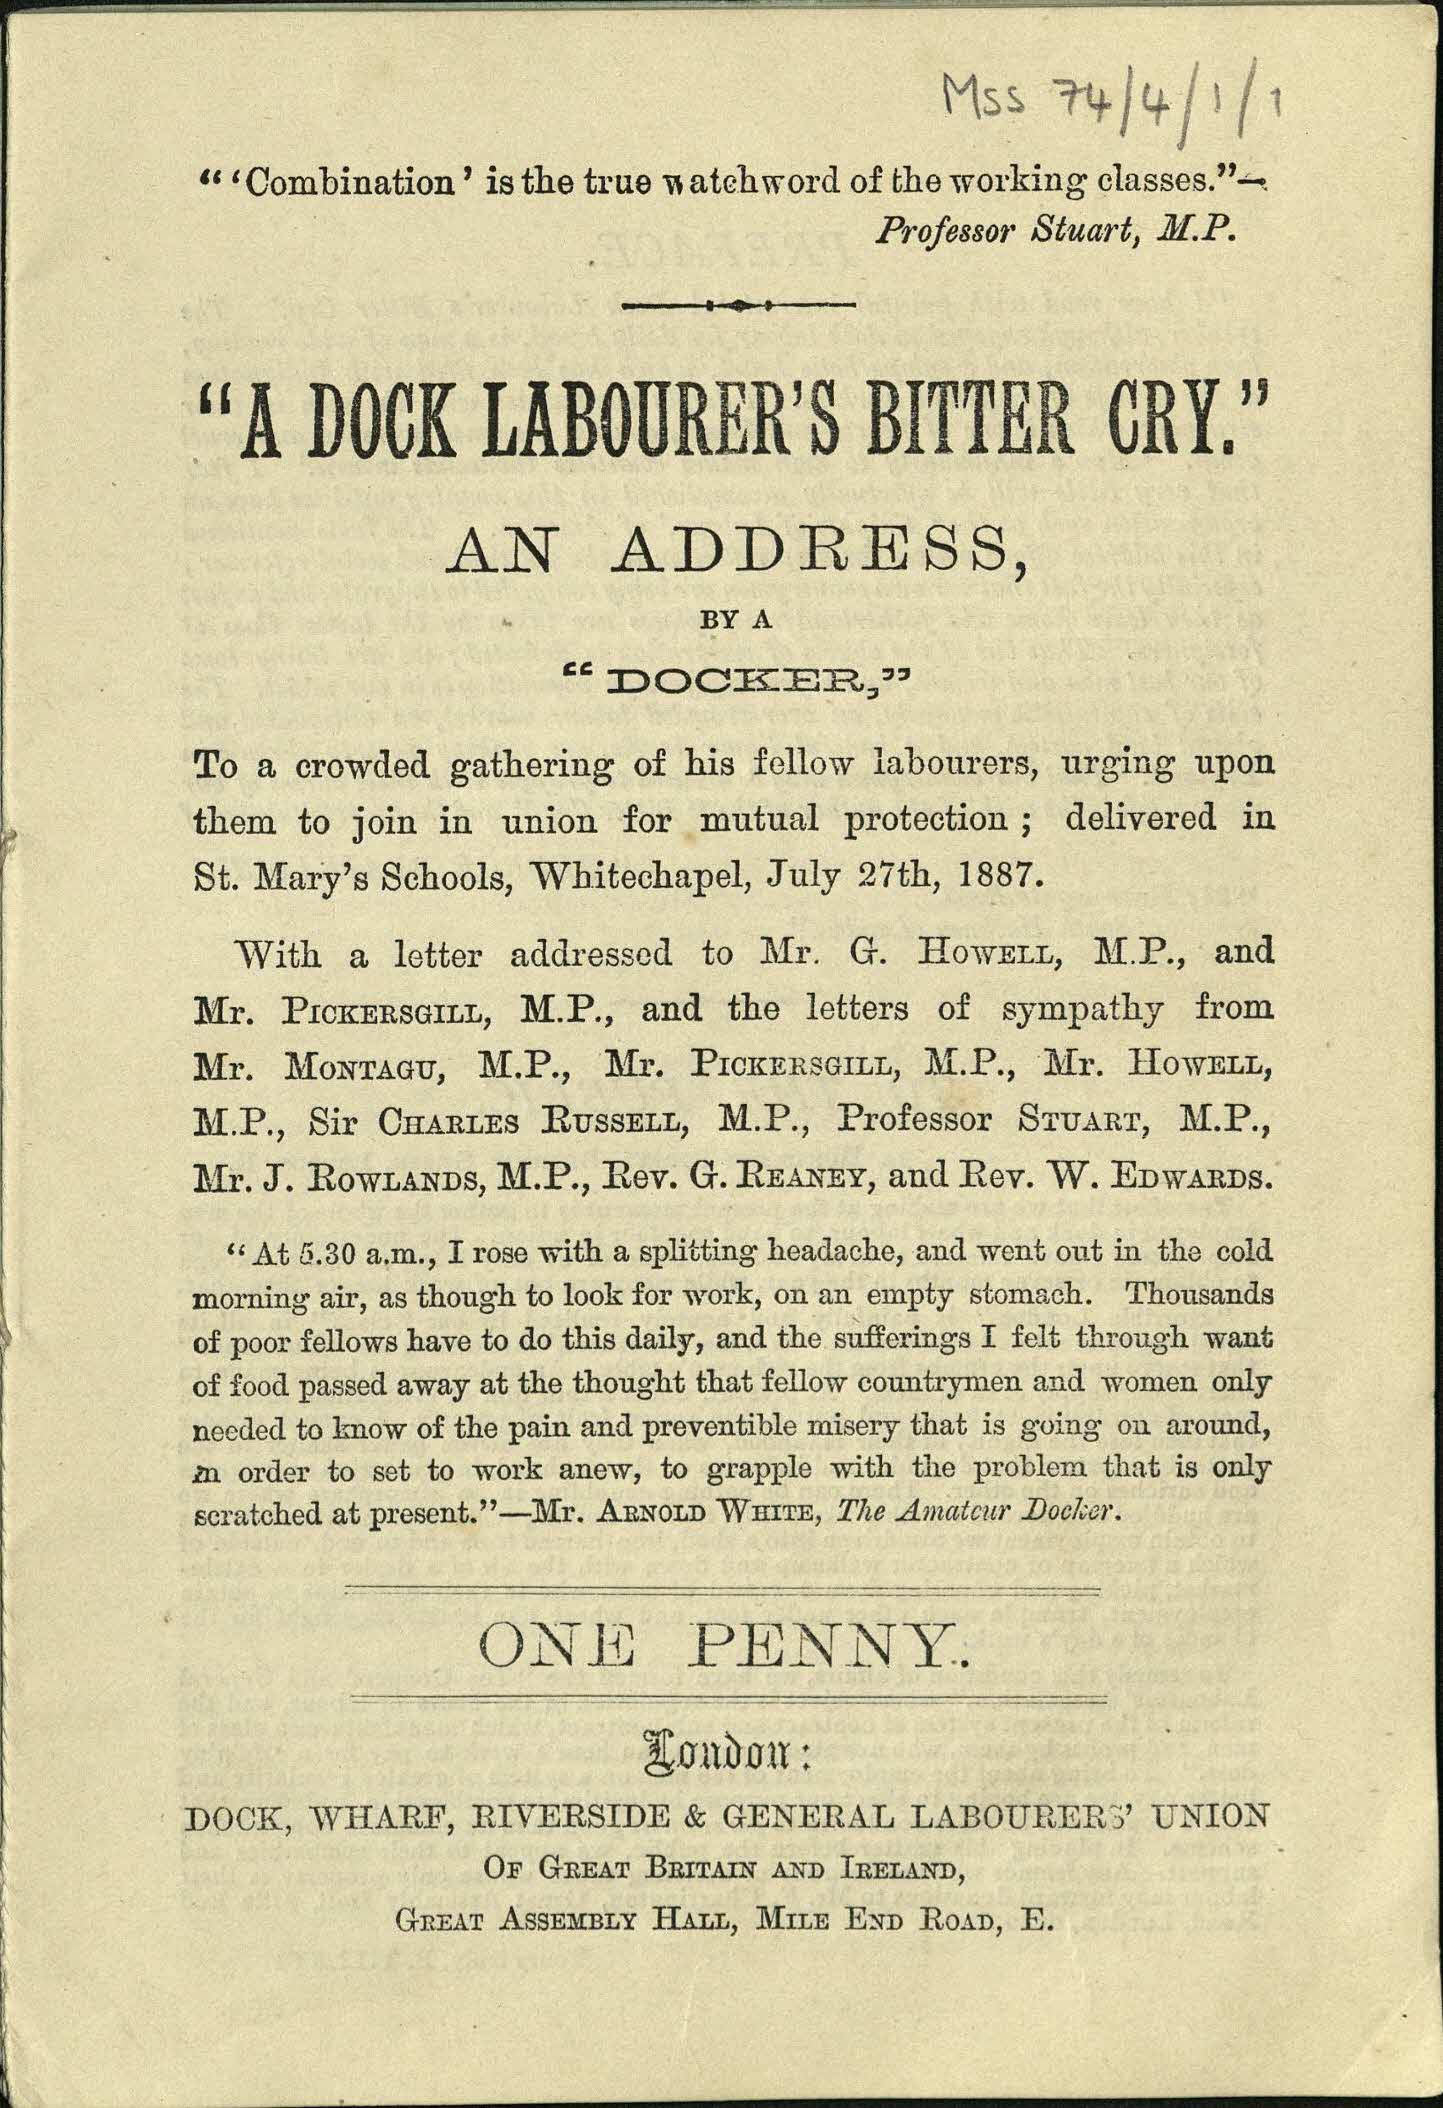 page from 'A dock labourer's bitter cry', pamphlet by Ben Tillett, 1889